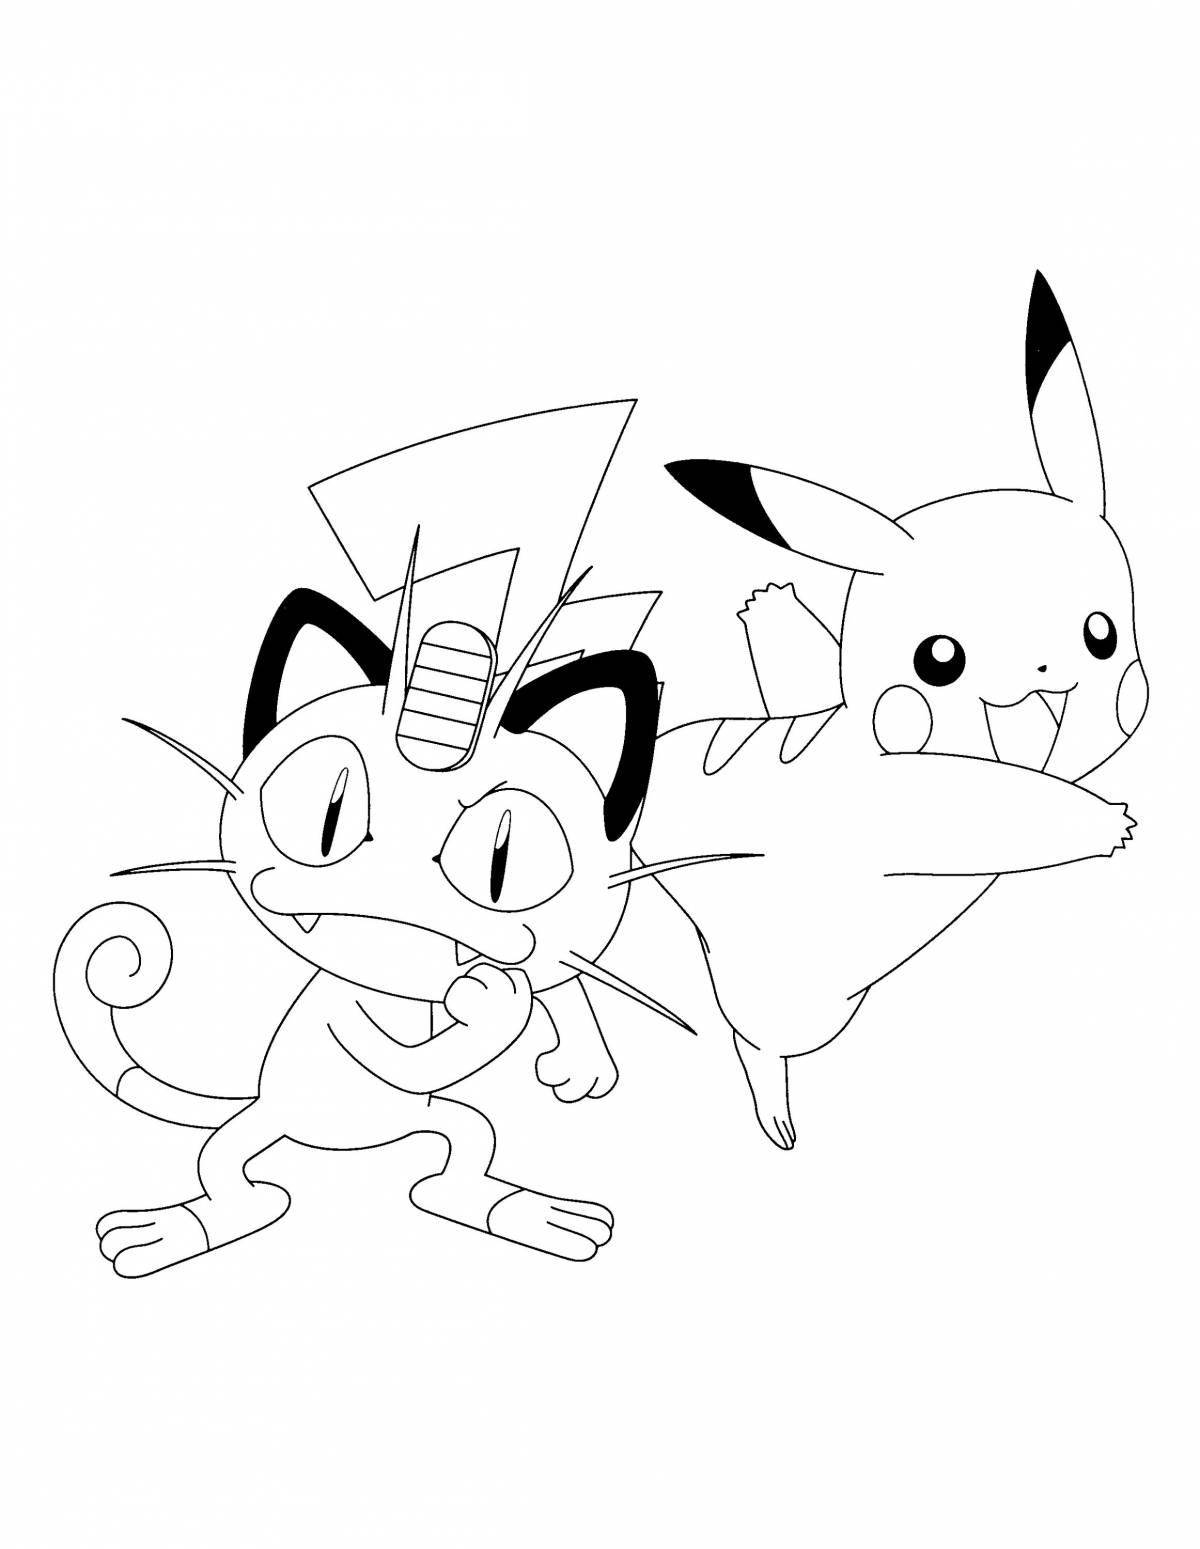 Coloring page charming meow